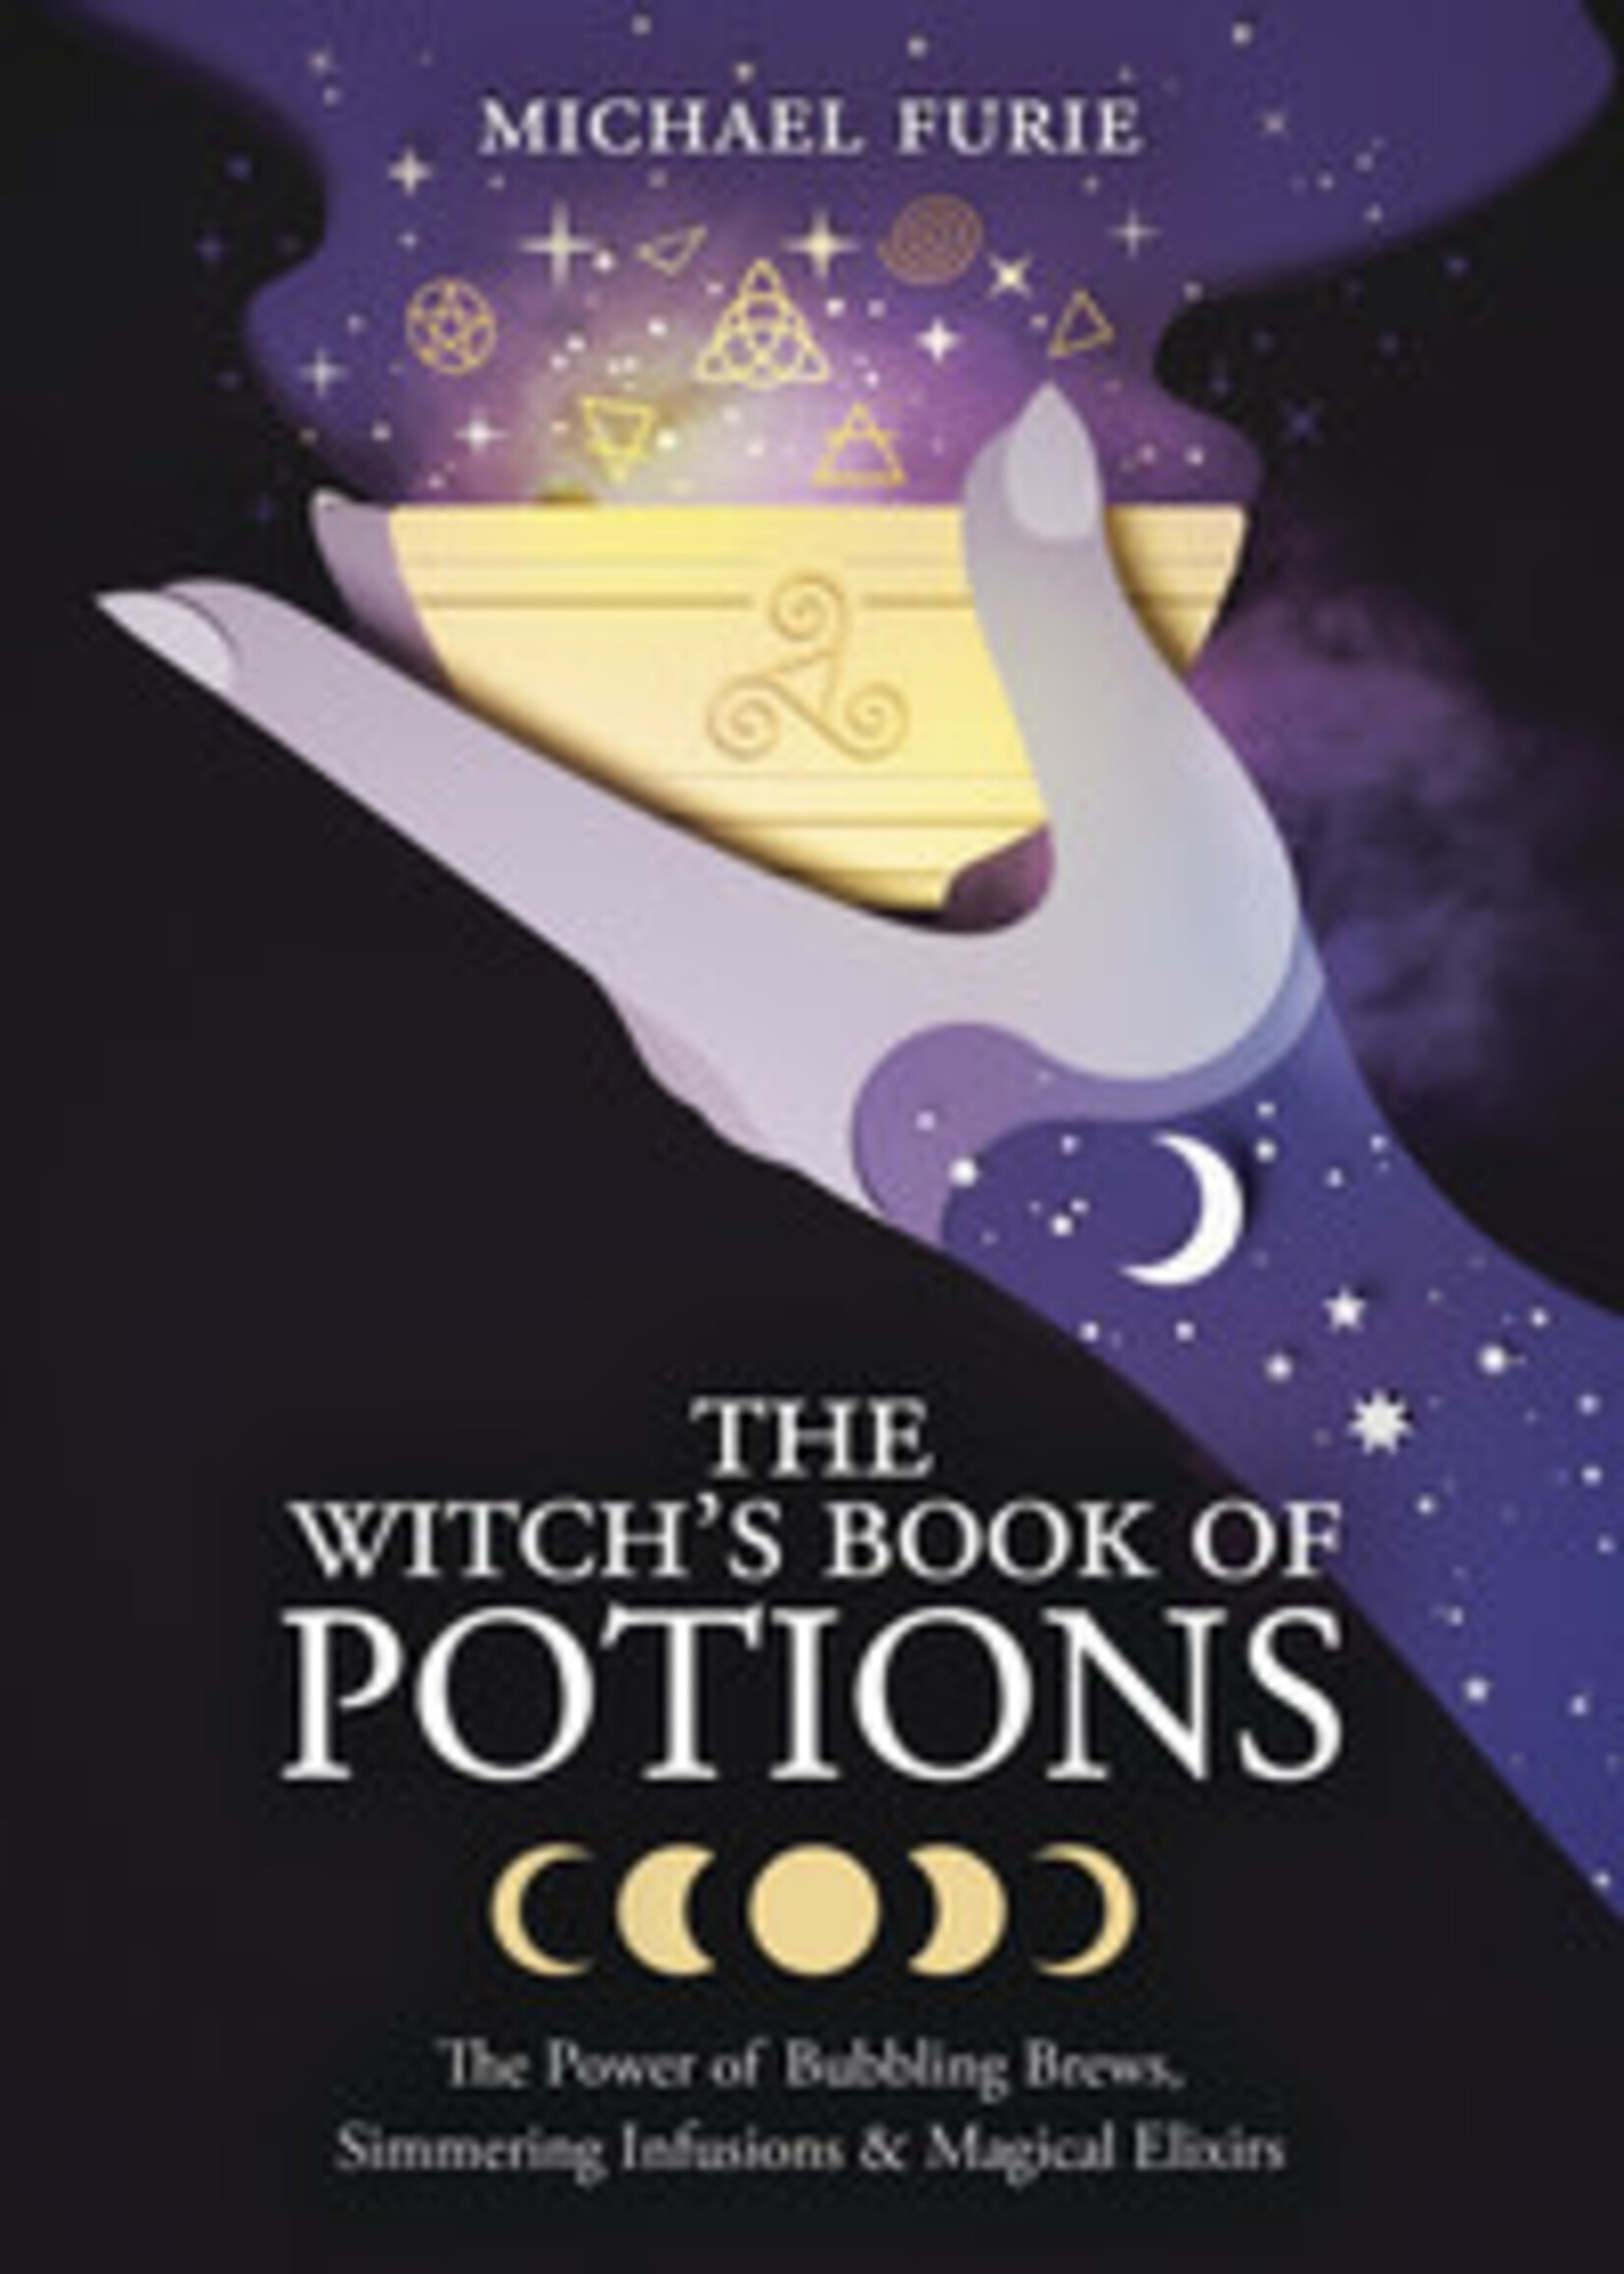 The Witch's Book of Potions by Michael Furie